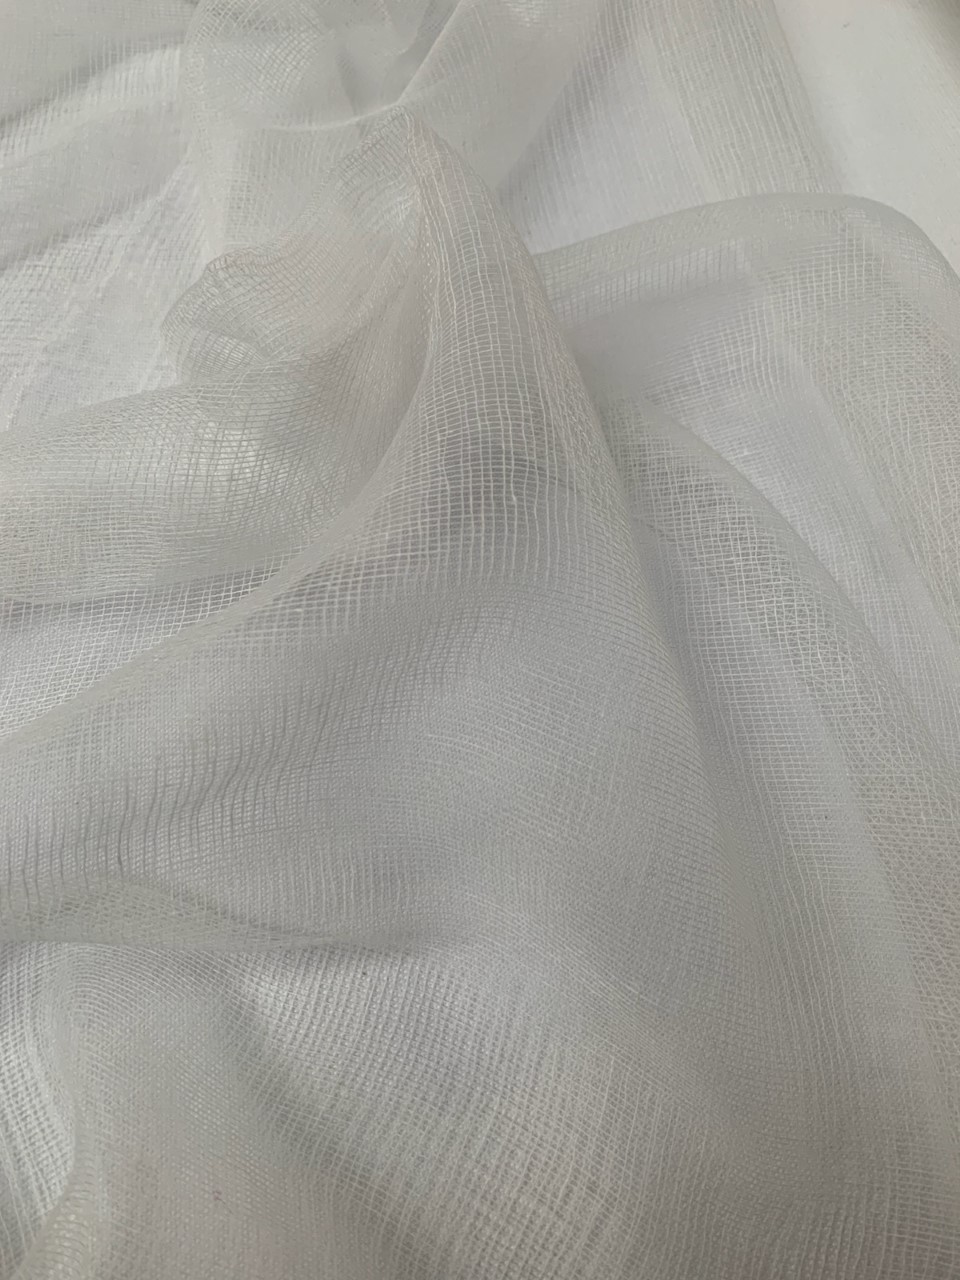 Grade 10 Cheesecloth 30" Wide - 1000 Yard Roll